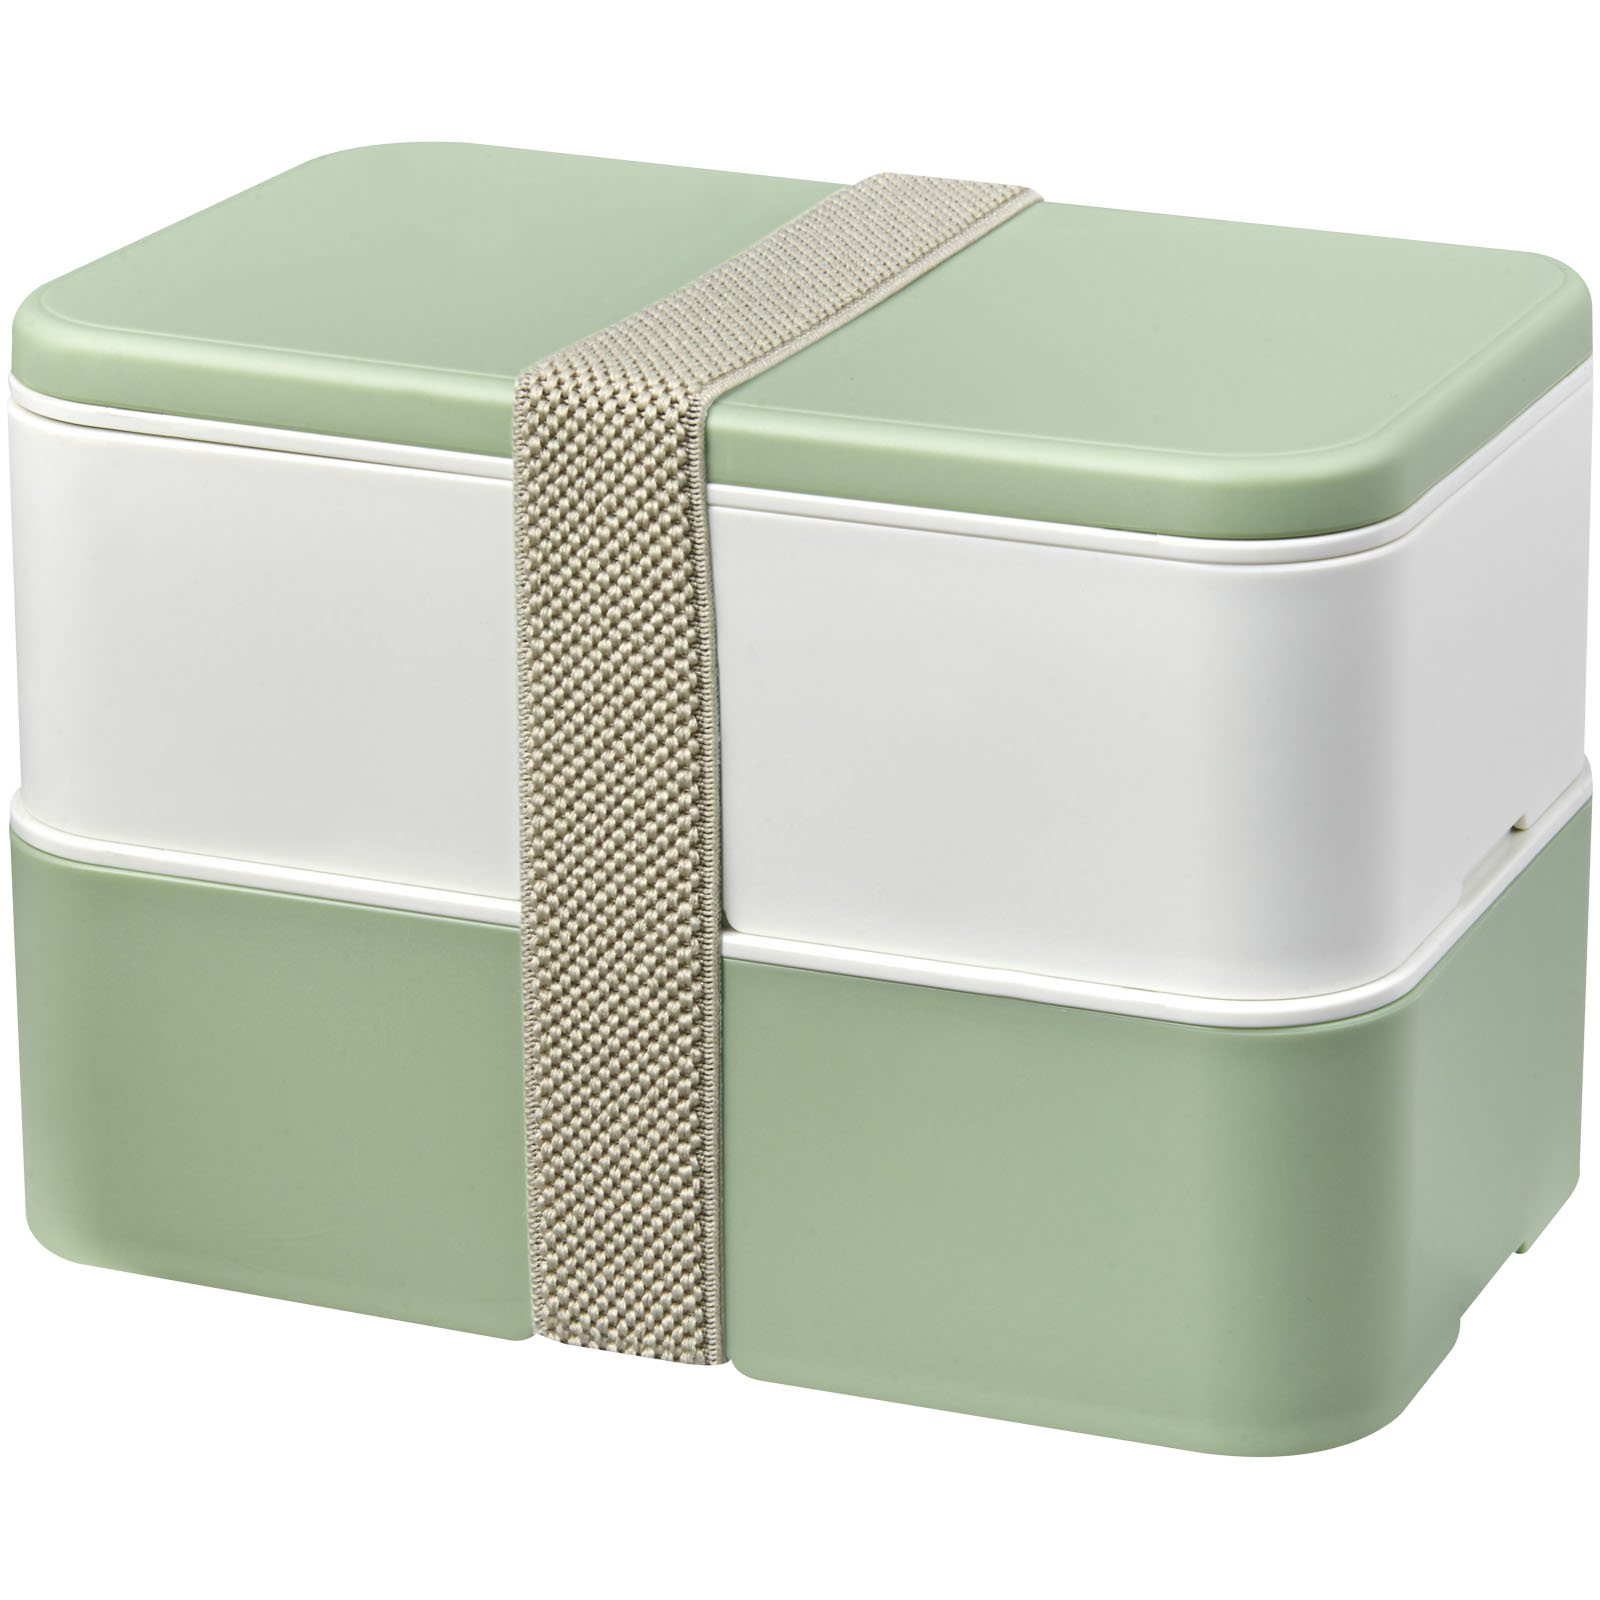 Advertising Lunch Boxes - MIYO Renew double layer lunch box